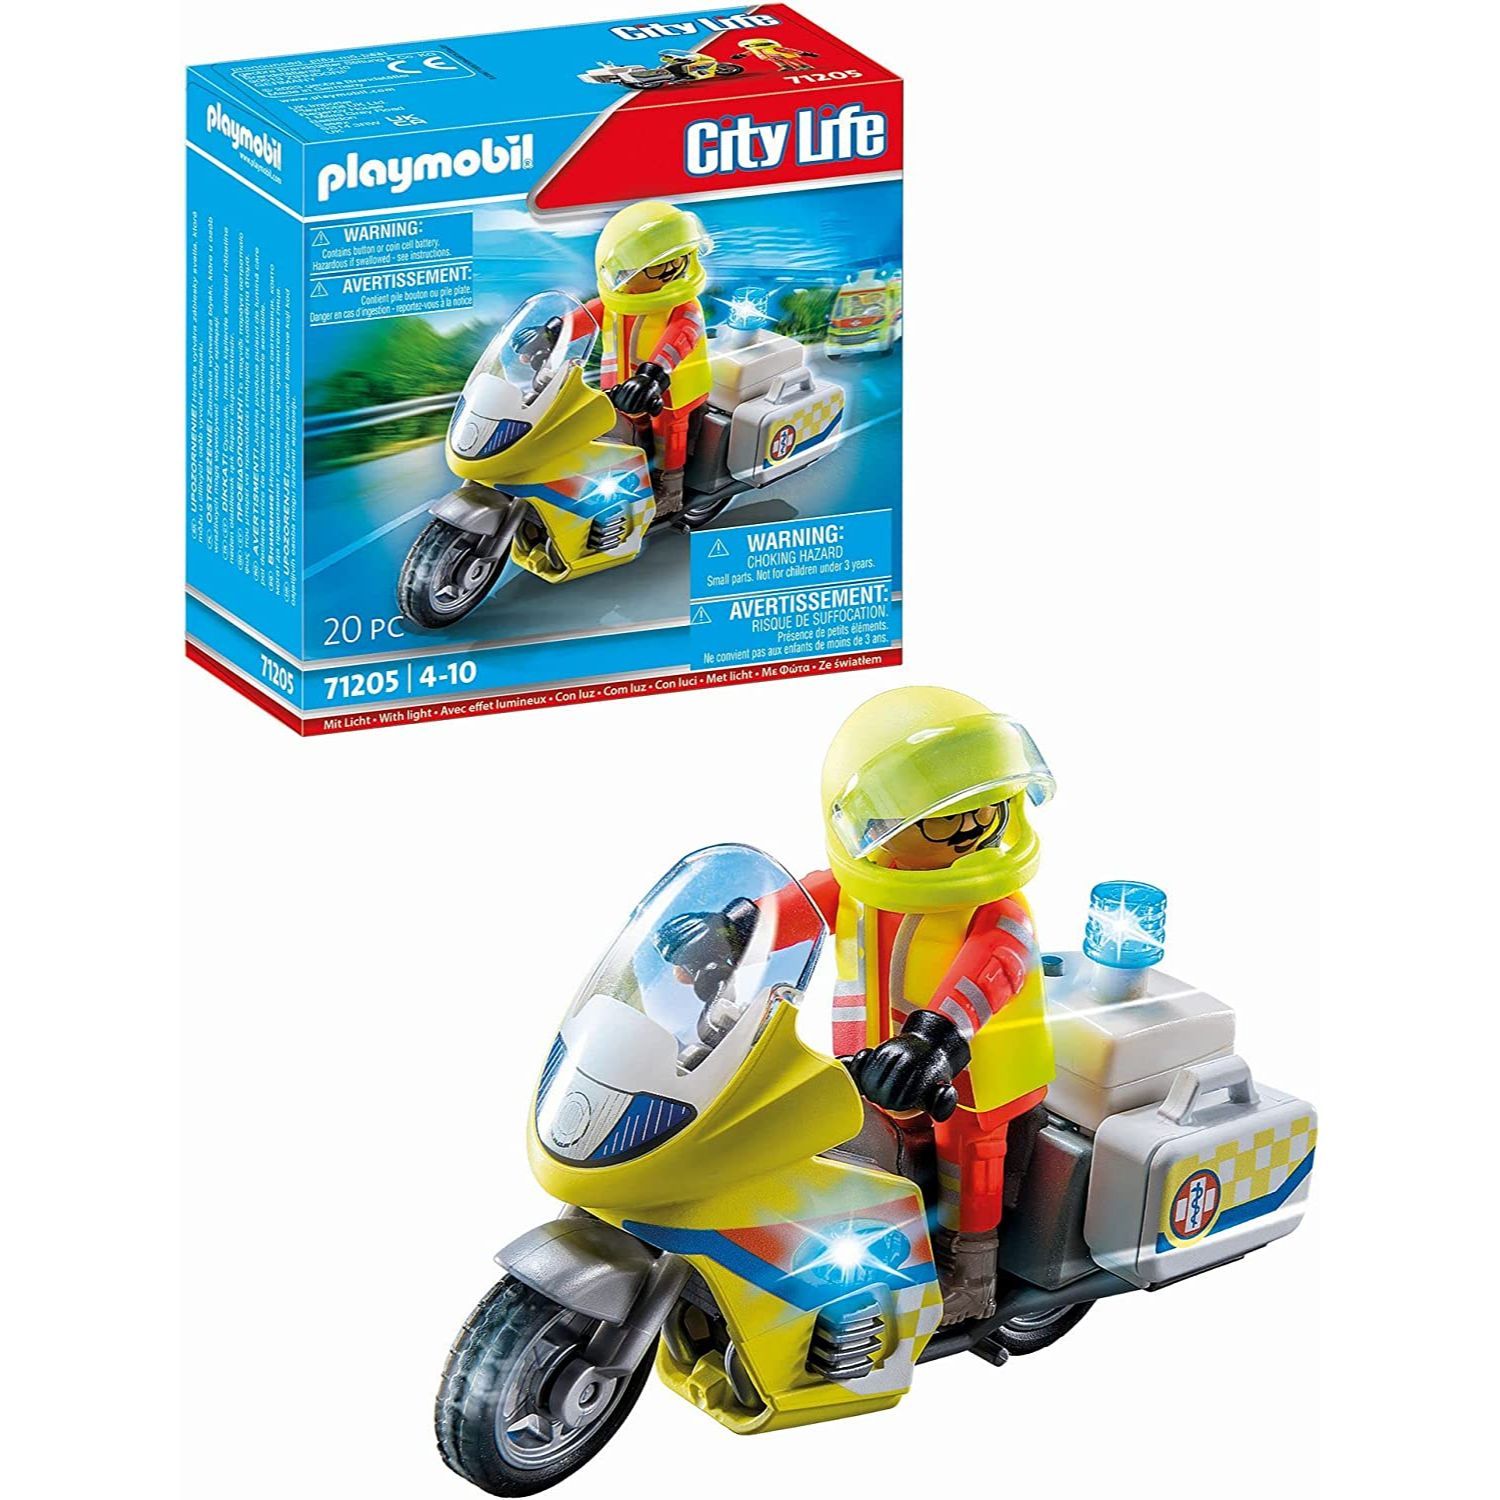 Rescue Motorcycle - Toys & Co. - Playmobil